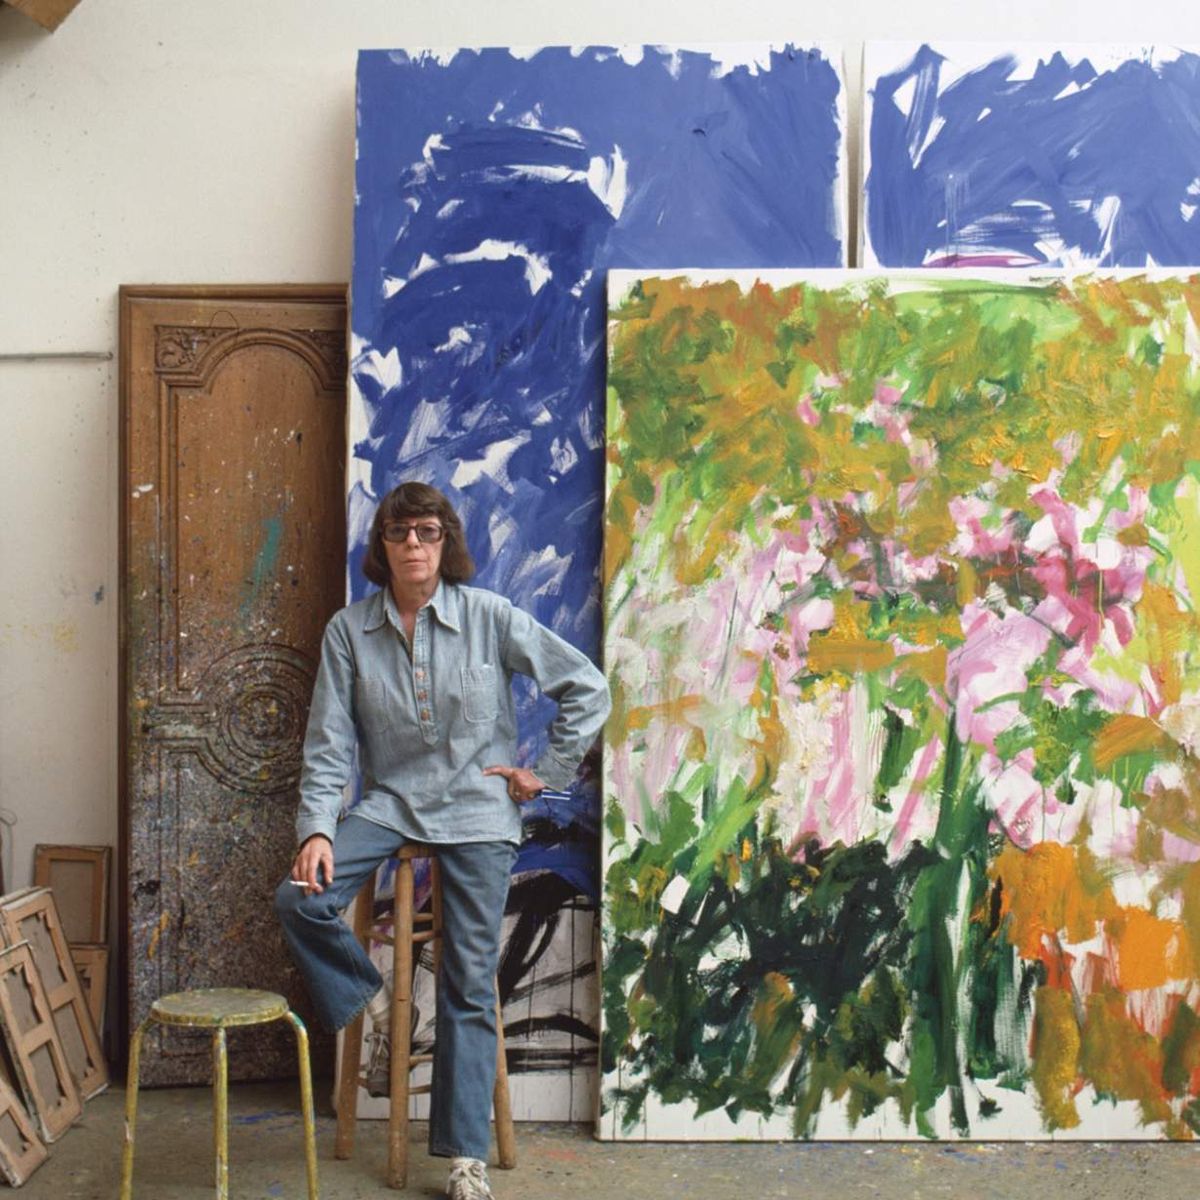 Joan Mitchell in her studio in Vétheuil, France, in 1983 Robert Freson, Joan Mitchell Foundation Archives/©Joan Mitchell Foundation